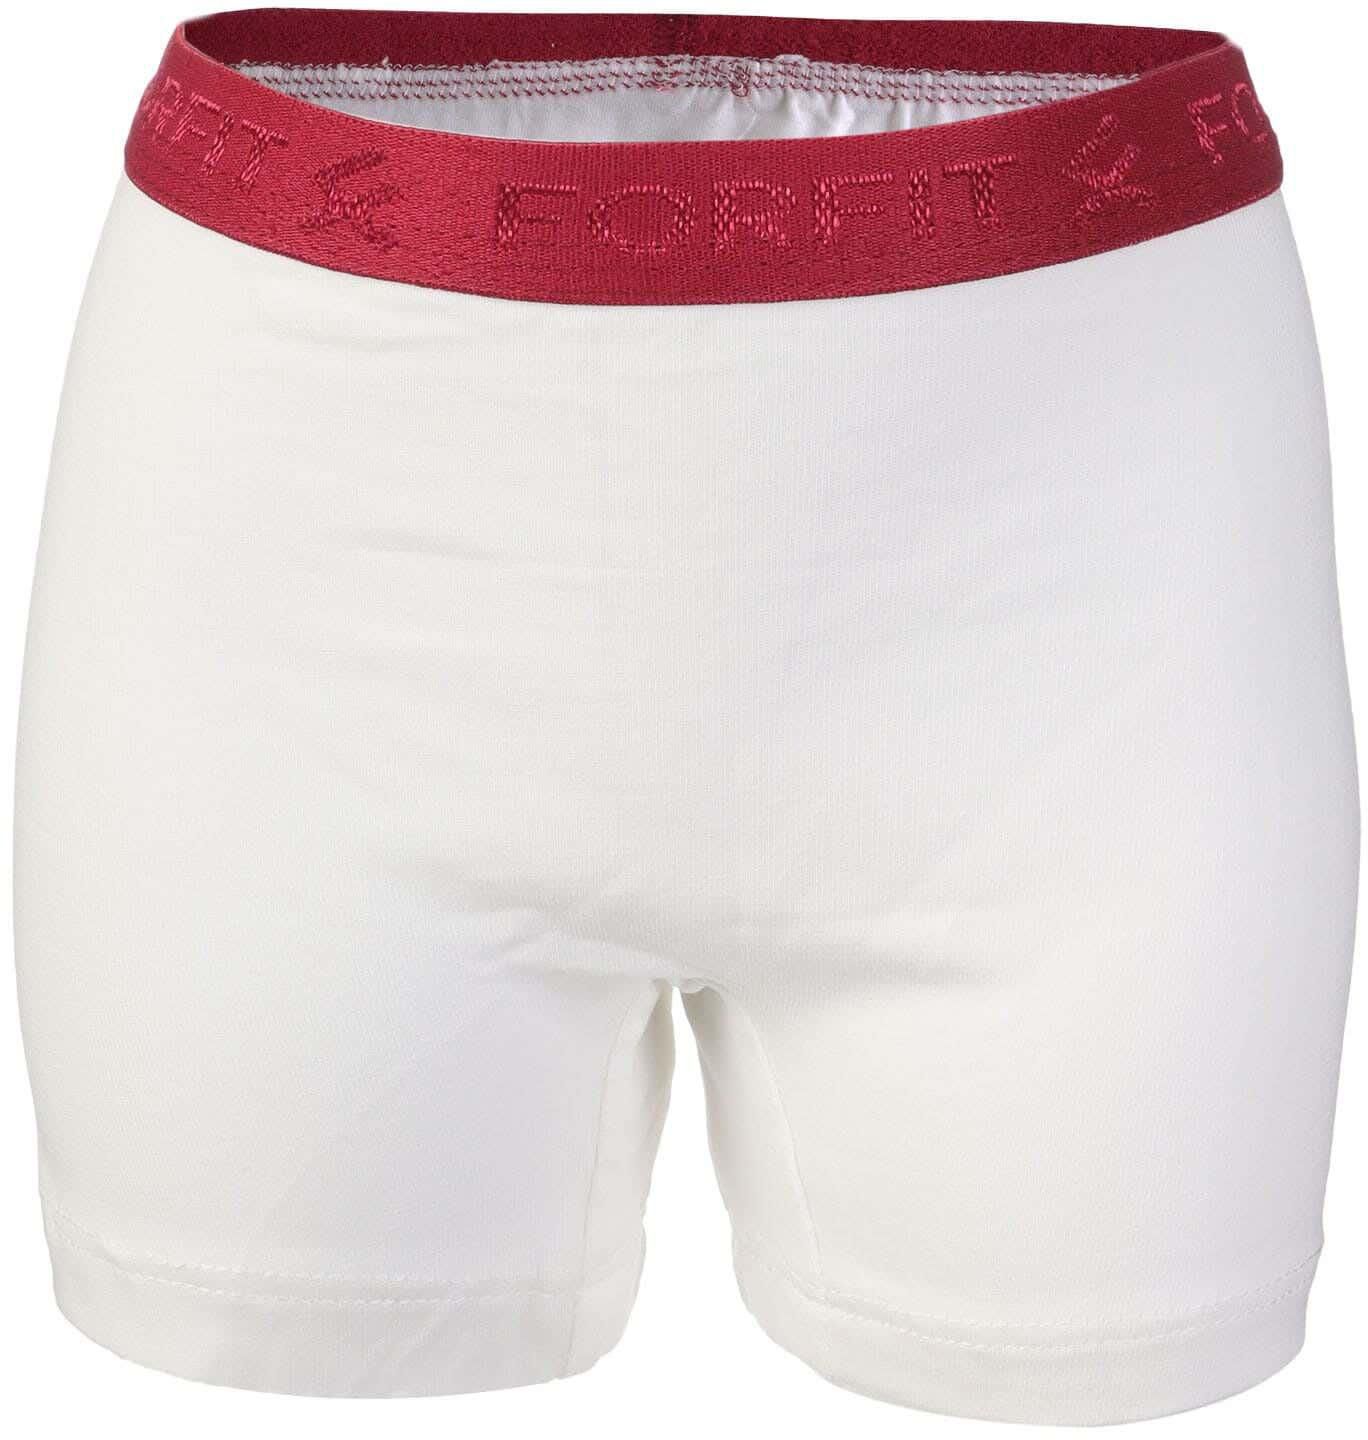 Get Forfit Lycra Hot Short for Girls, Size 8 - White with best offers | Raneen.com